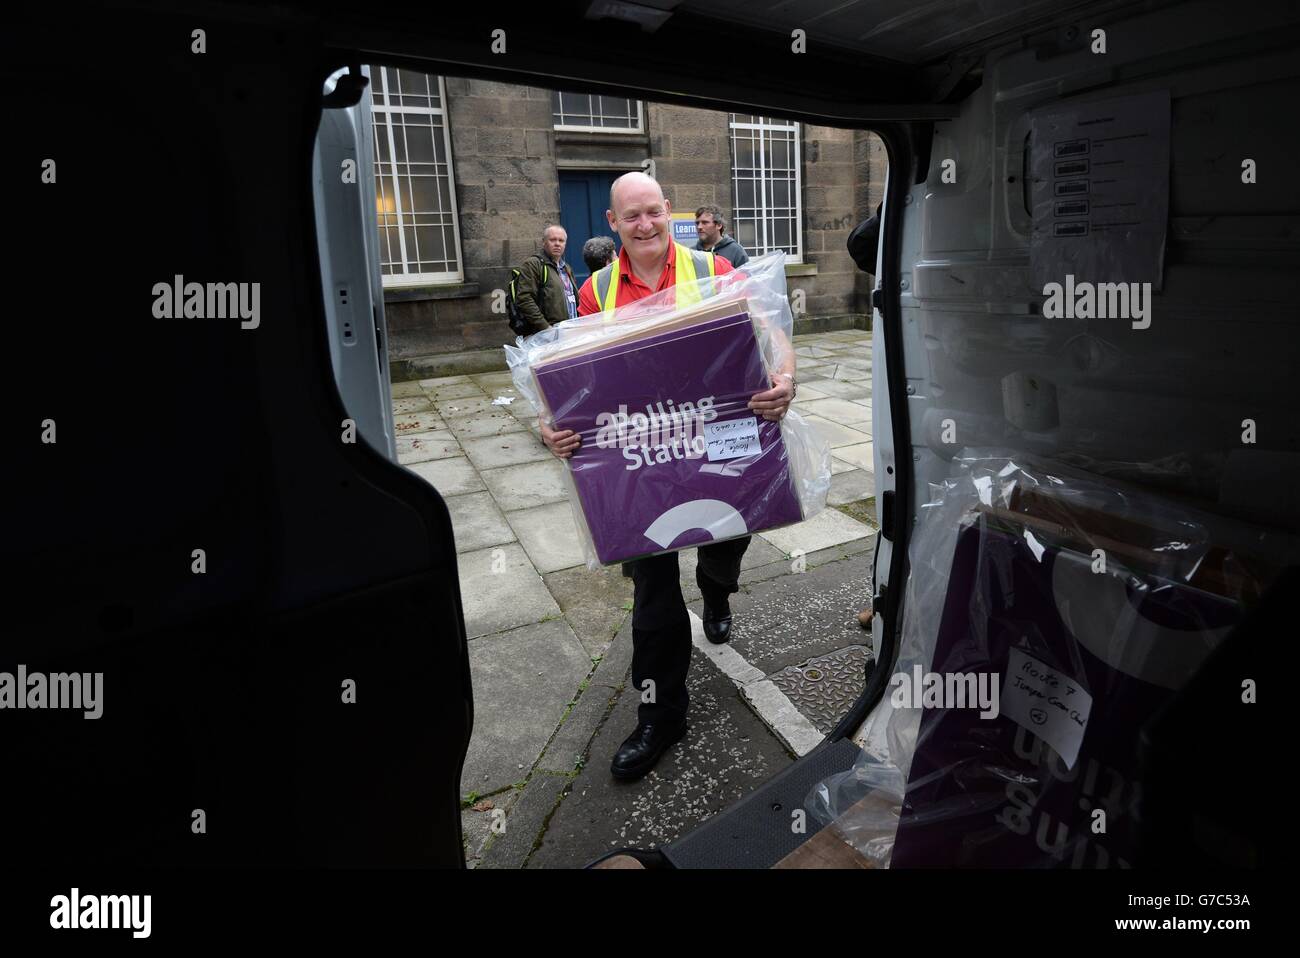 Ballot boxes and polling station signs are loaded into vans in Edinburgh to be taken to polling stations across Scotland ahead of the independence referendum. Stock Photo